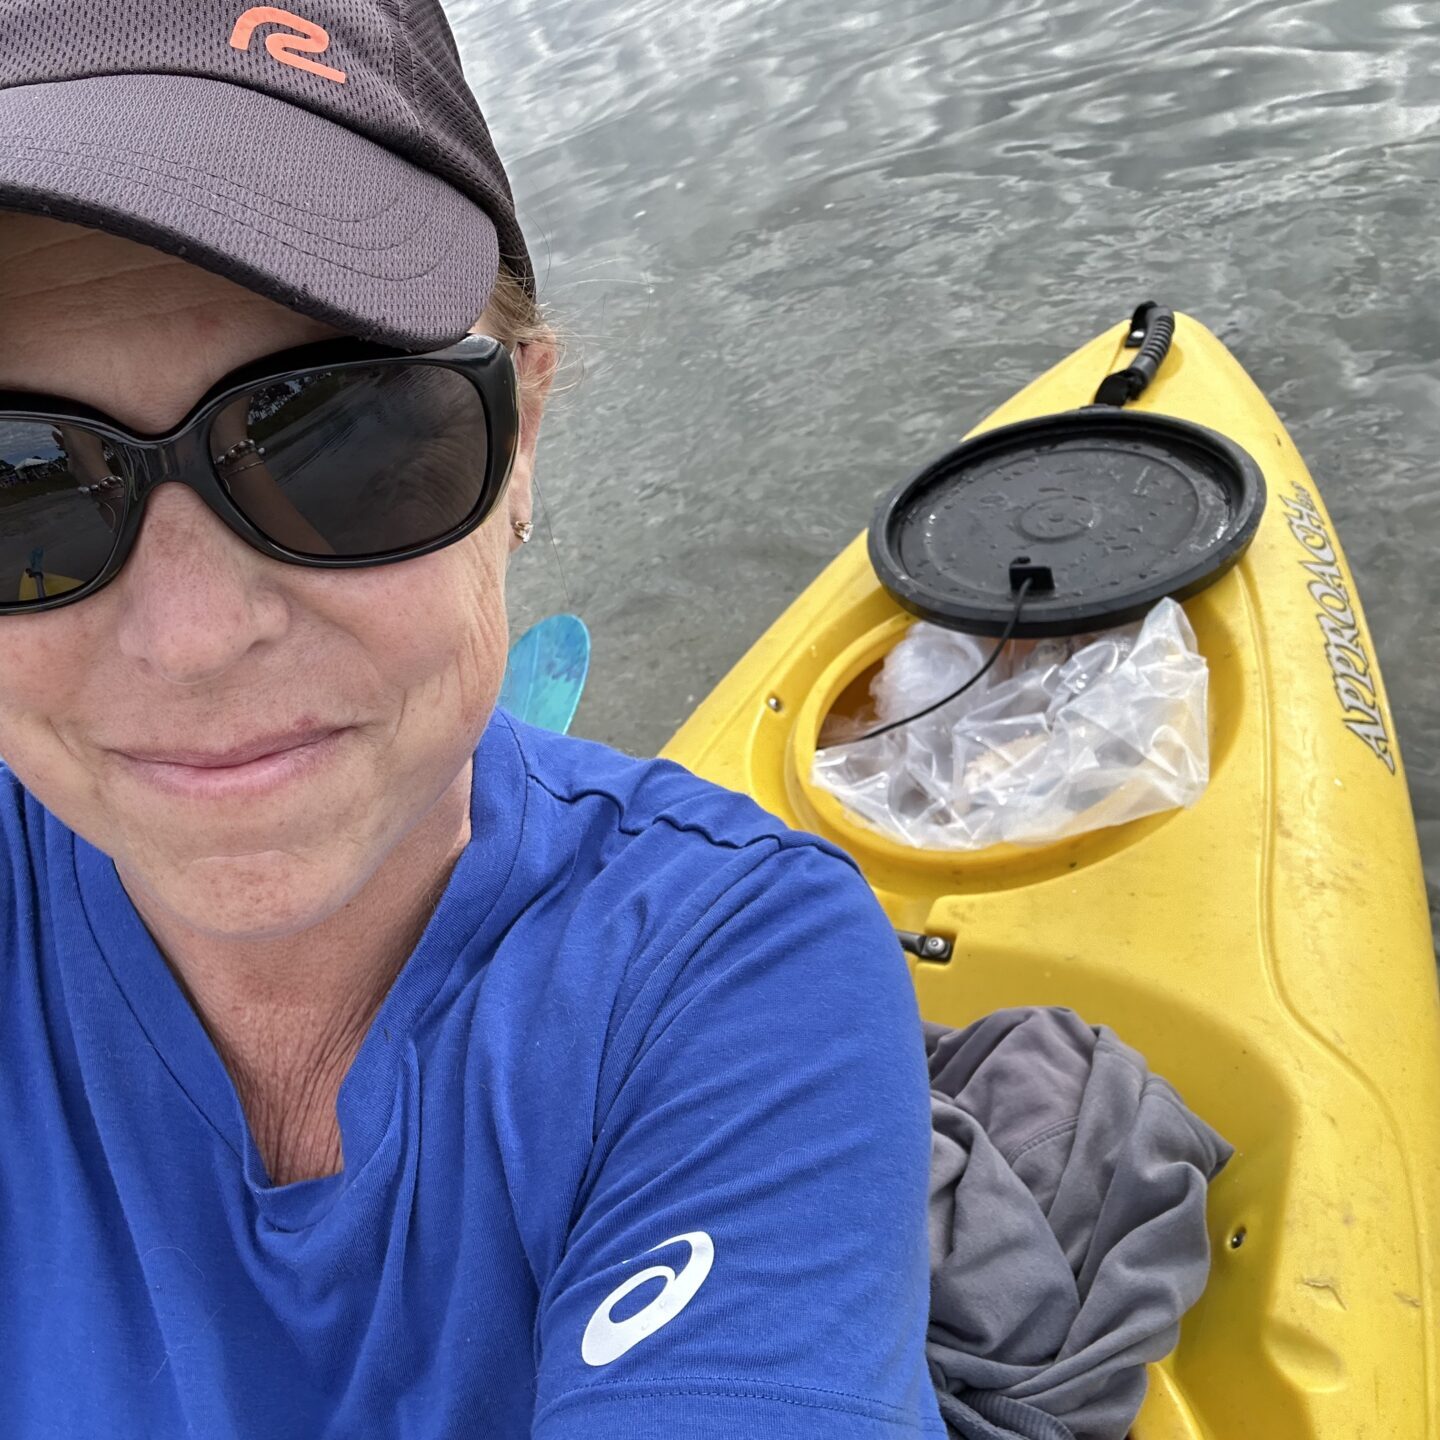 When the wind is low, you can find me in my yellow kayak in Princeton Harbor. Here, I bought fresh crab and paddled them into shore.